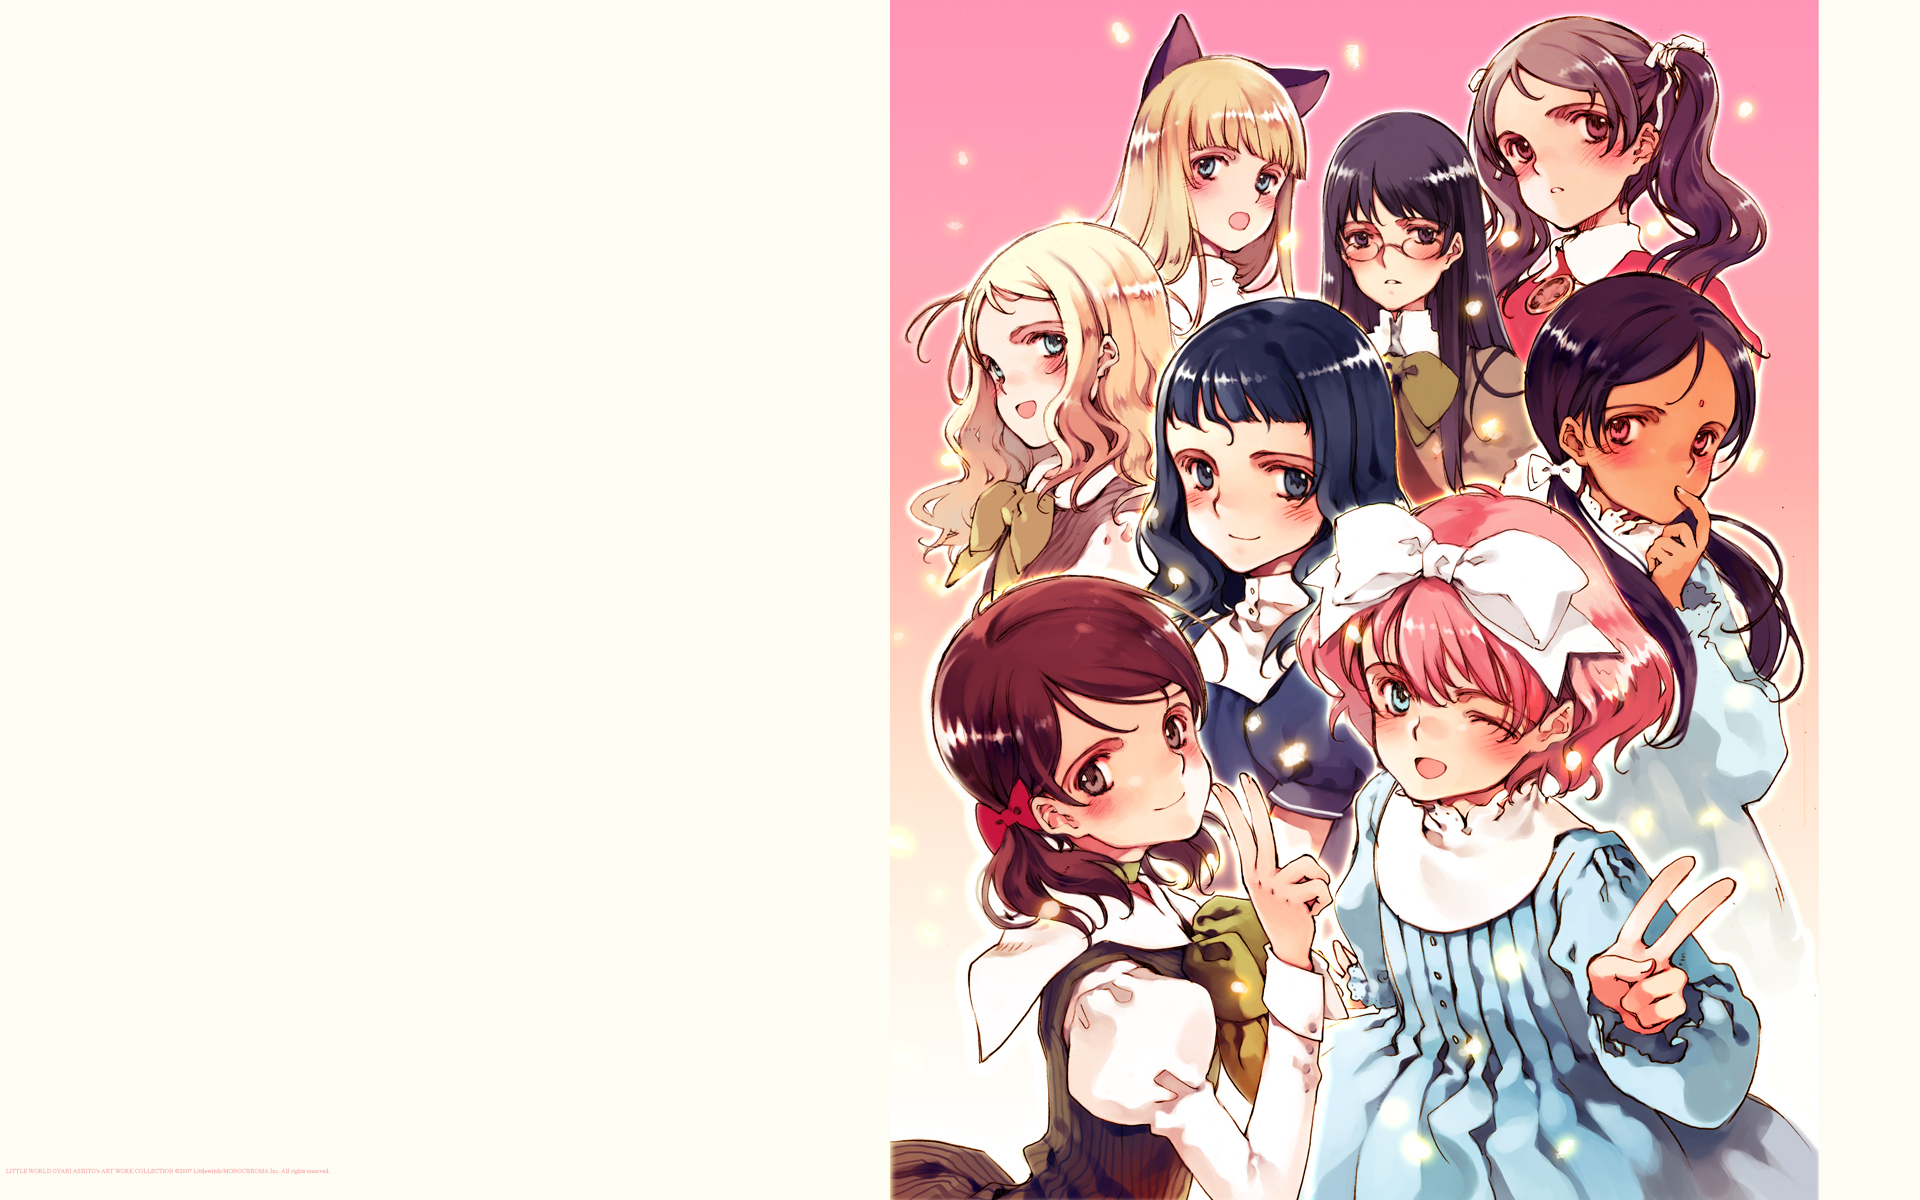 Littlewitch Romanesque Wallpapers